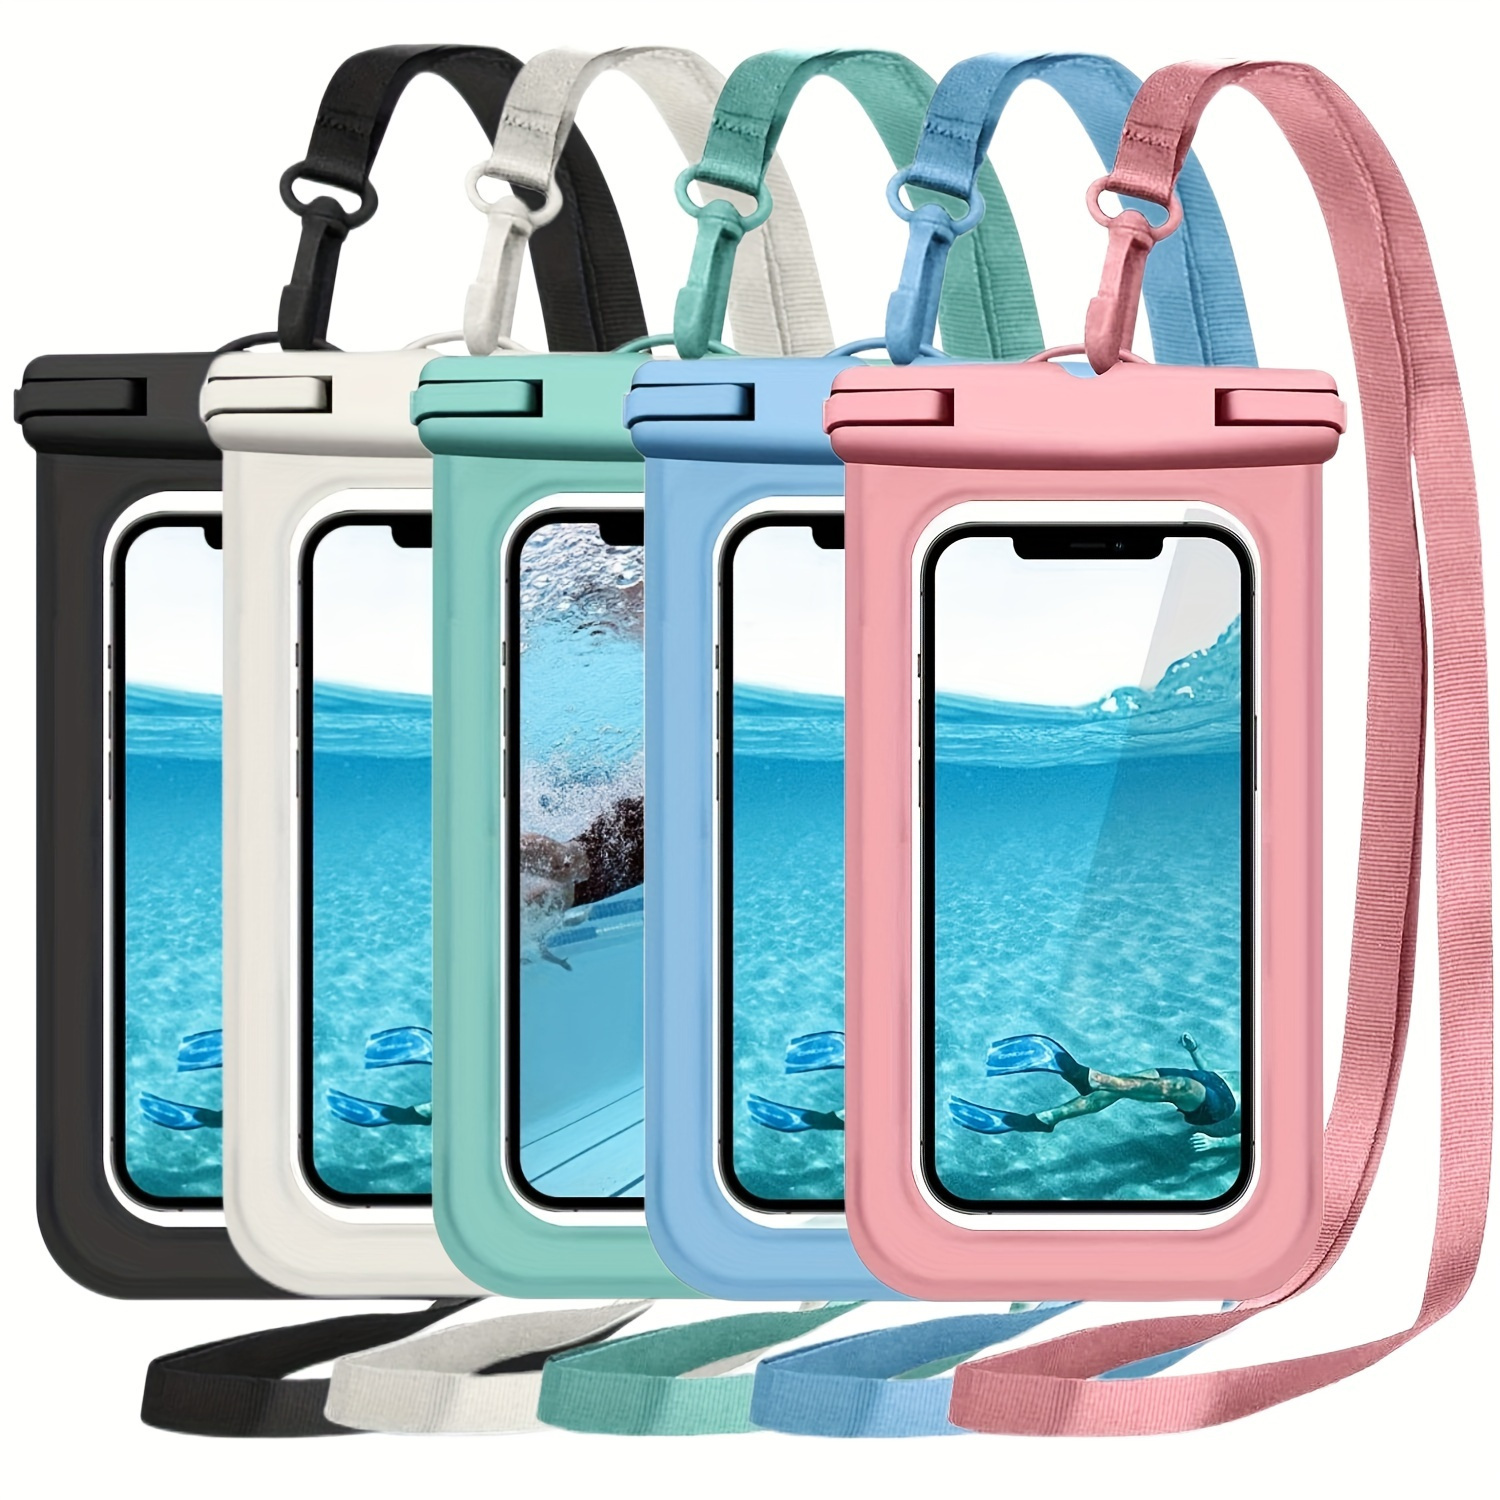 

2-packs Extra-large Waterproof Pouches - Keep Your Smartphone Dry & Protected Underwater